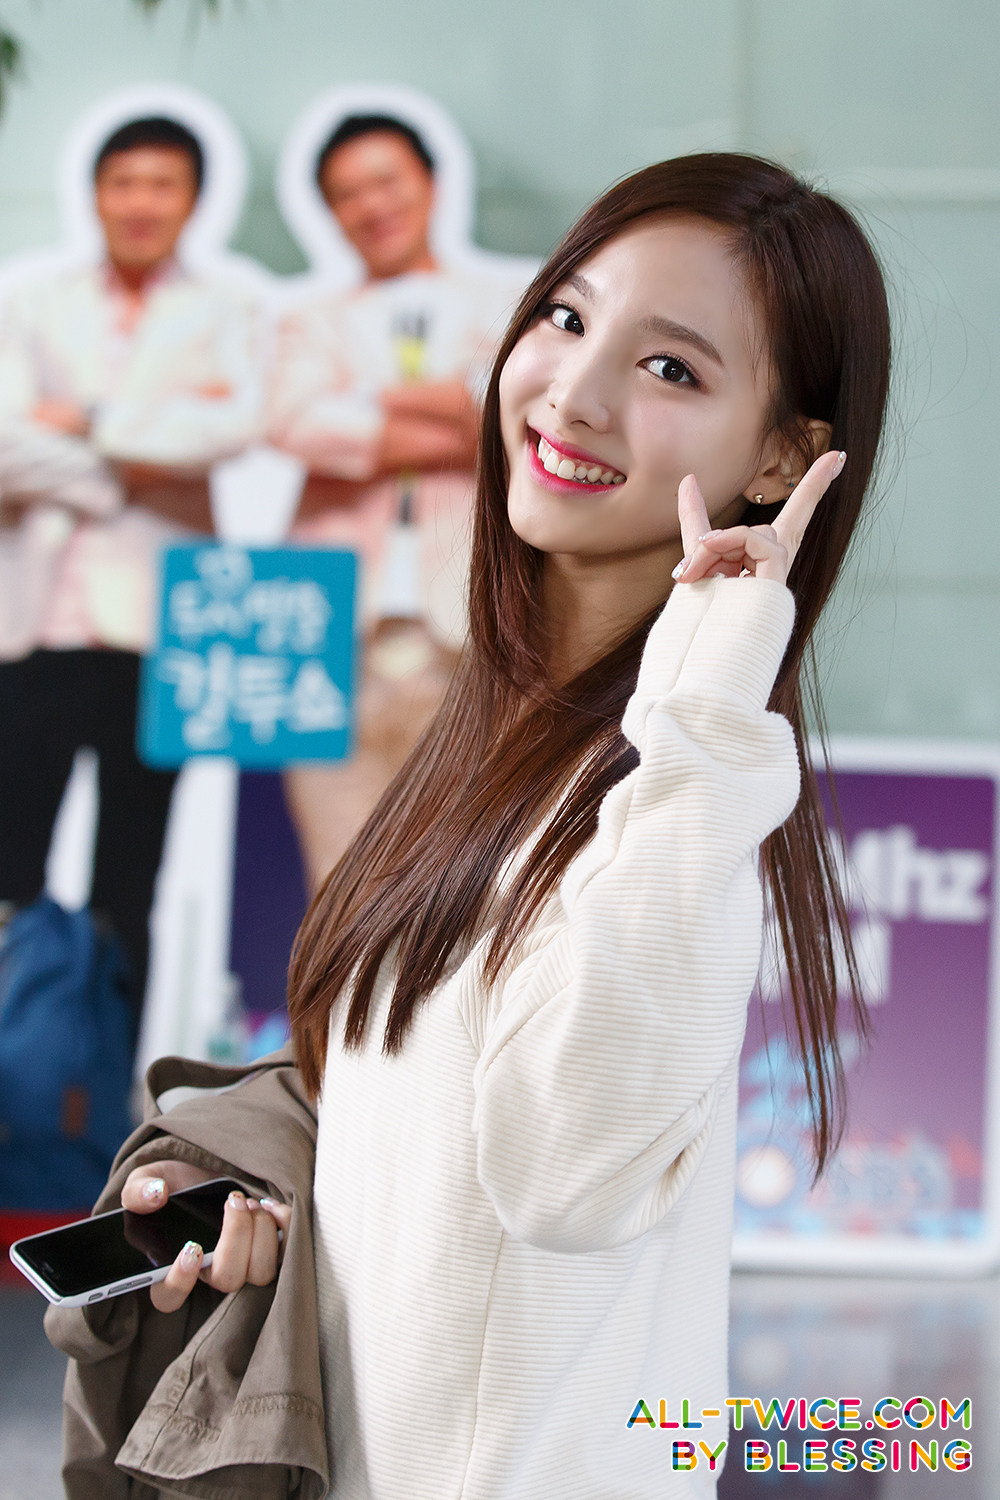 Image result for nayeon twice